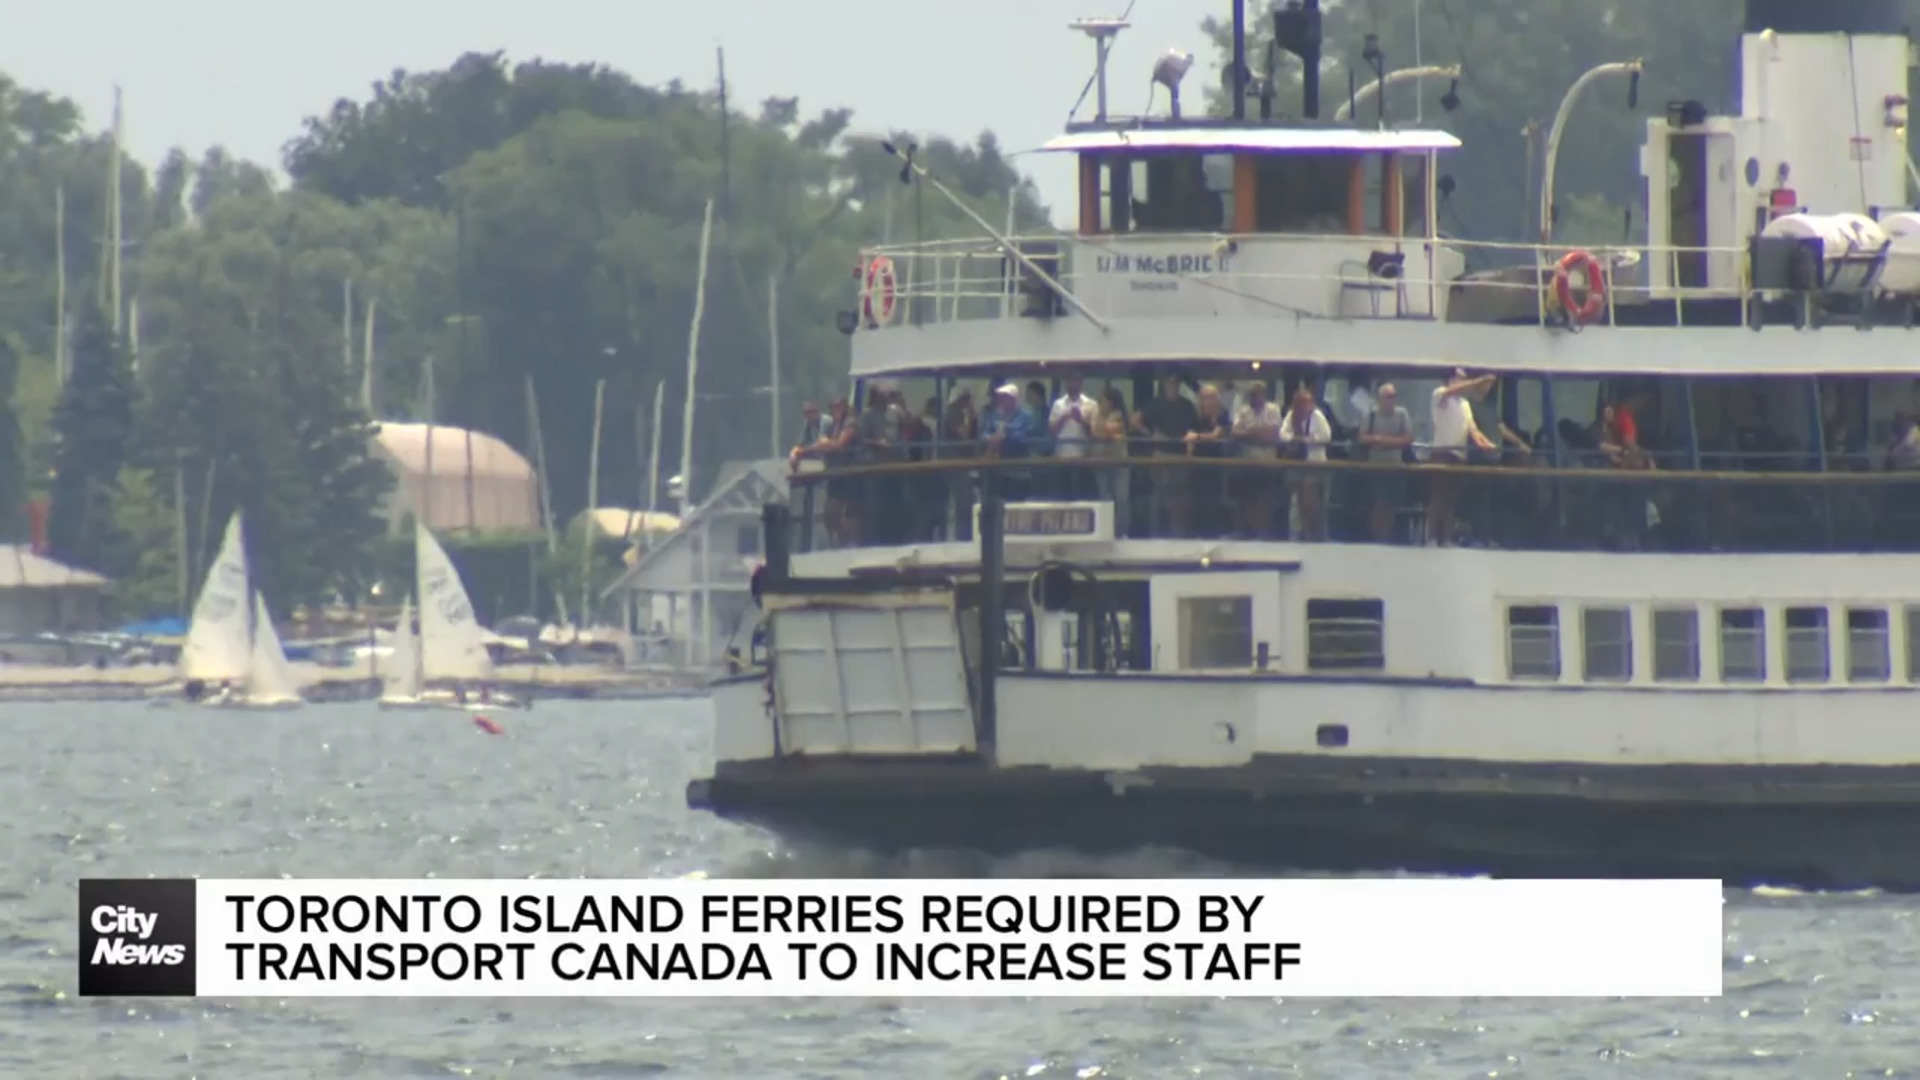 Transport Canada requires more staff on Toronto Island ferries